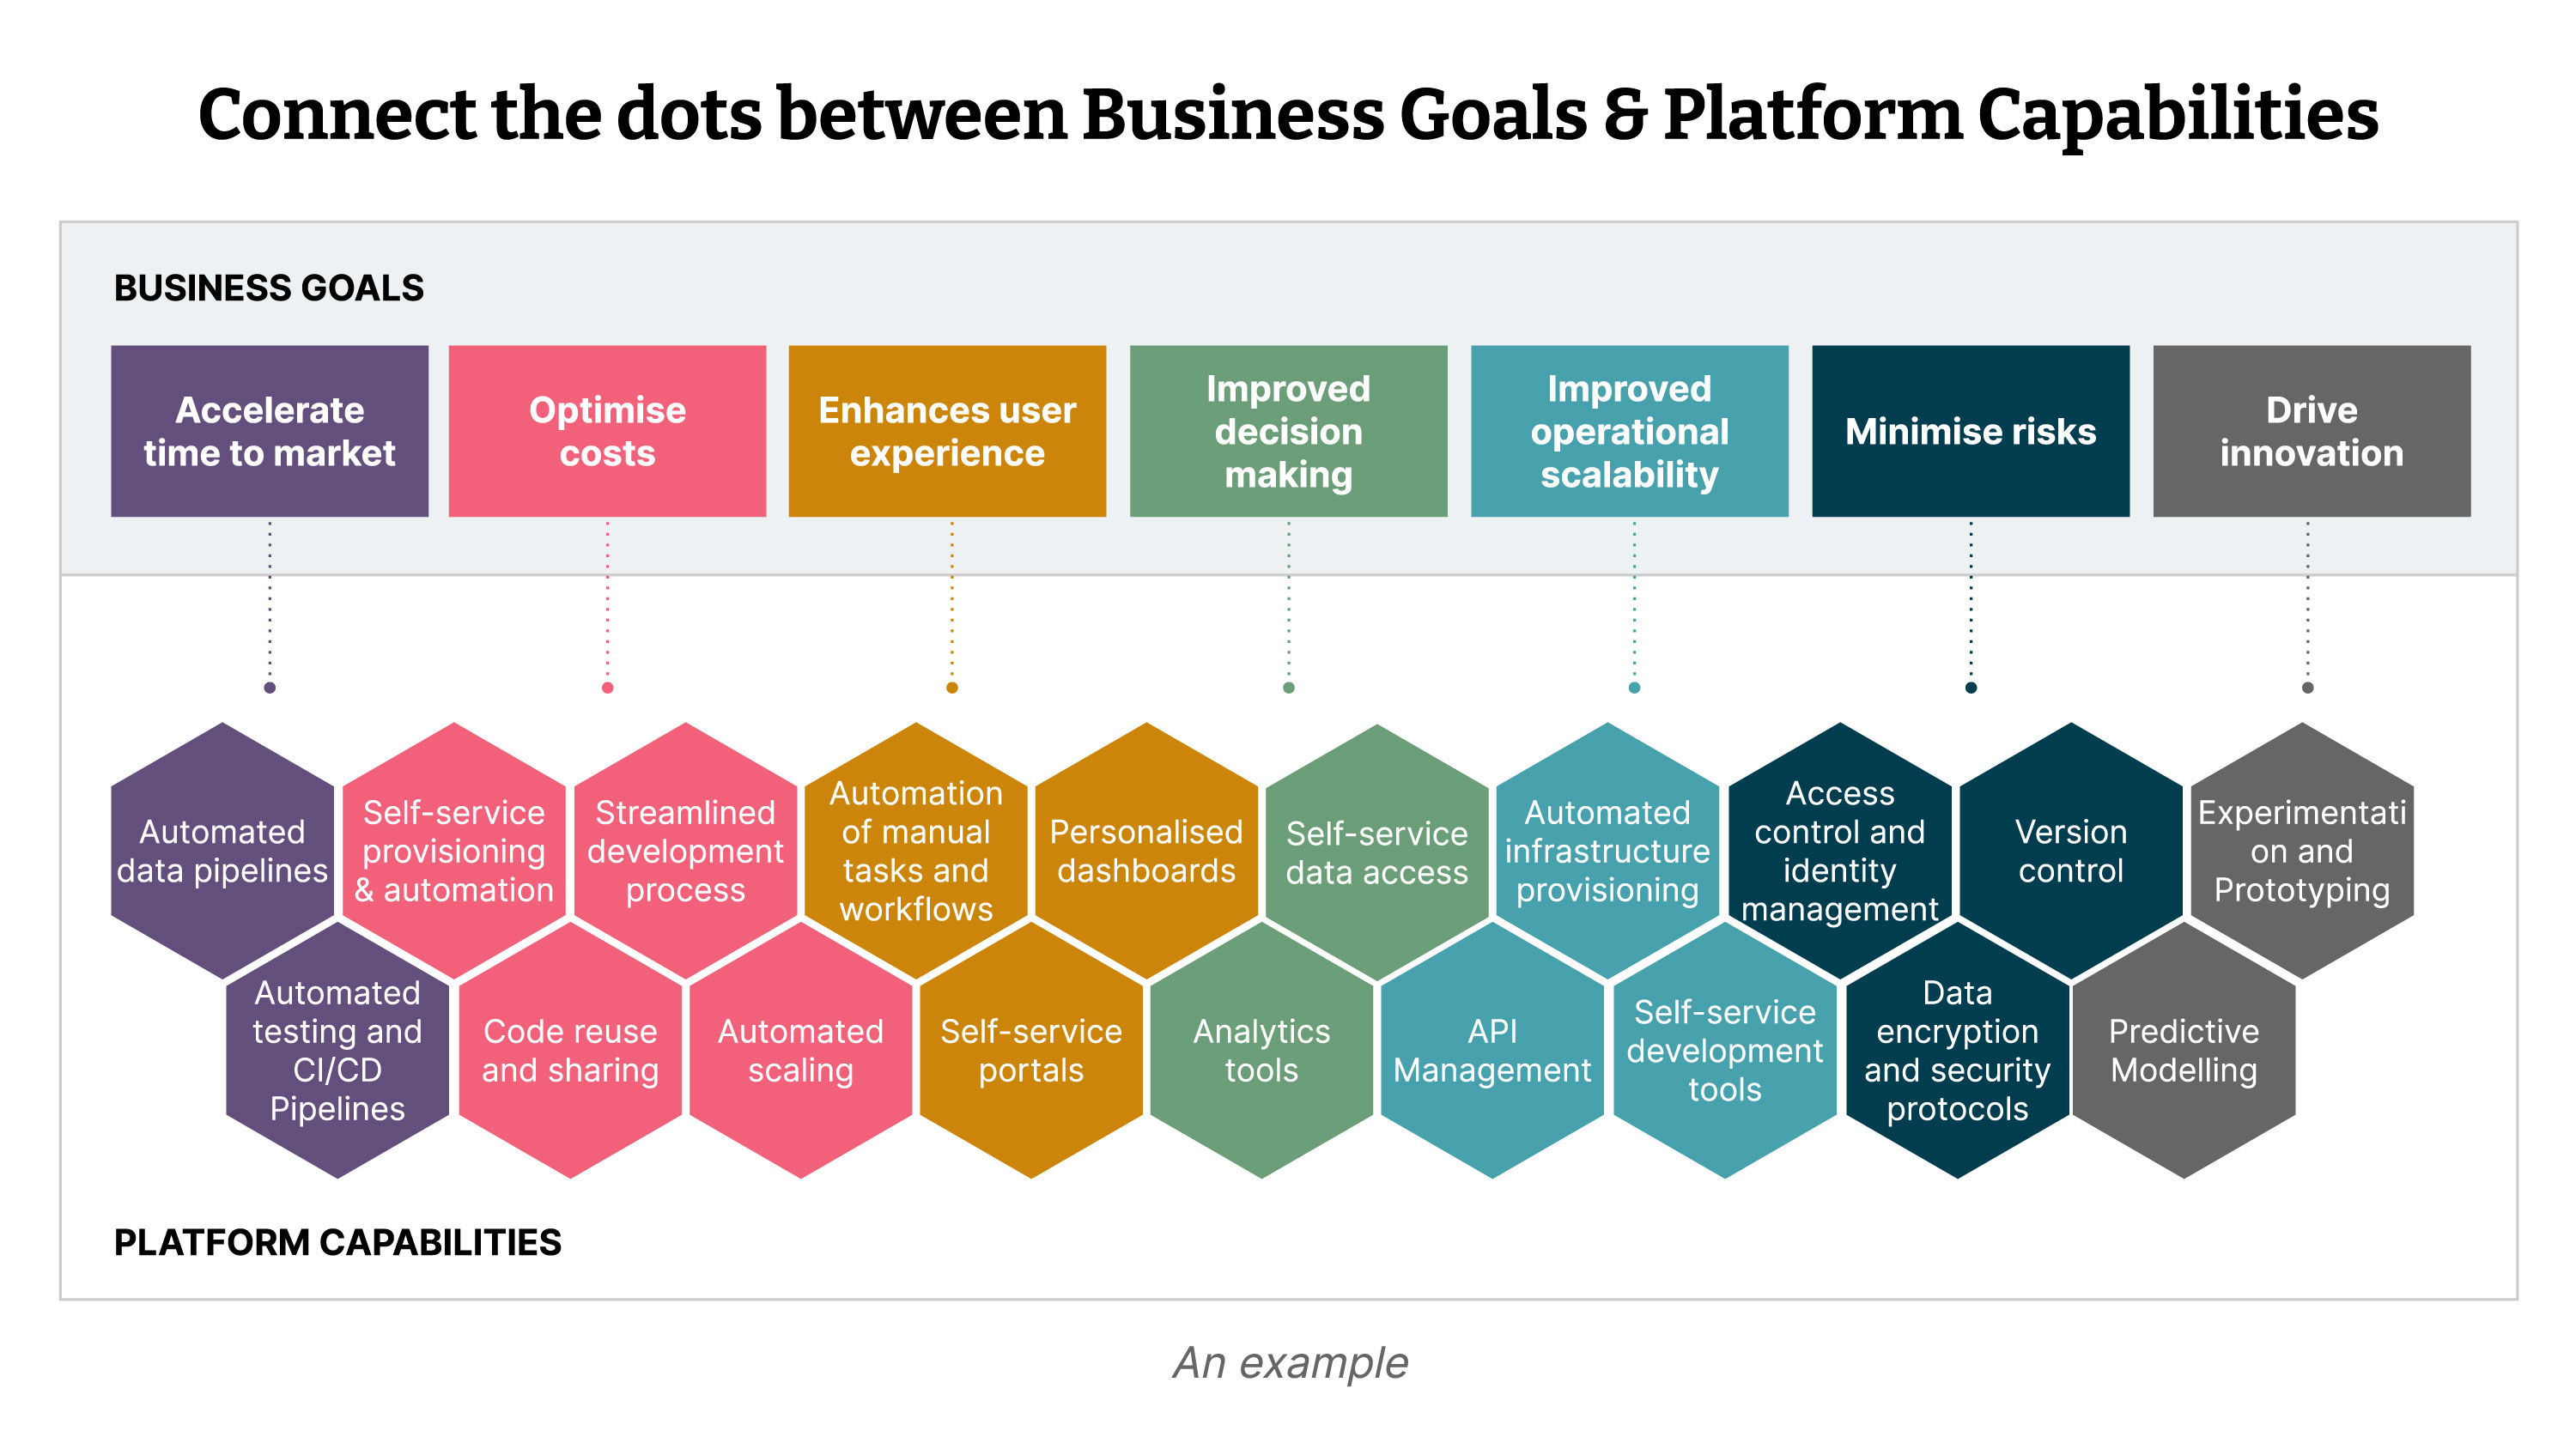 Connecting the dots between business goals and platform capabilities